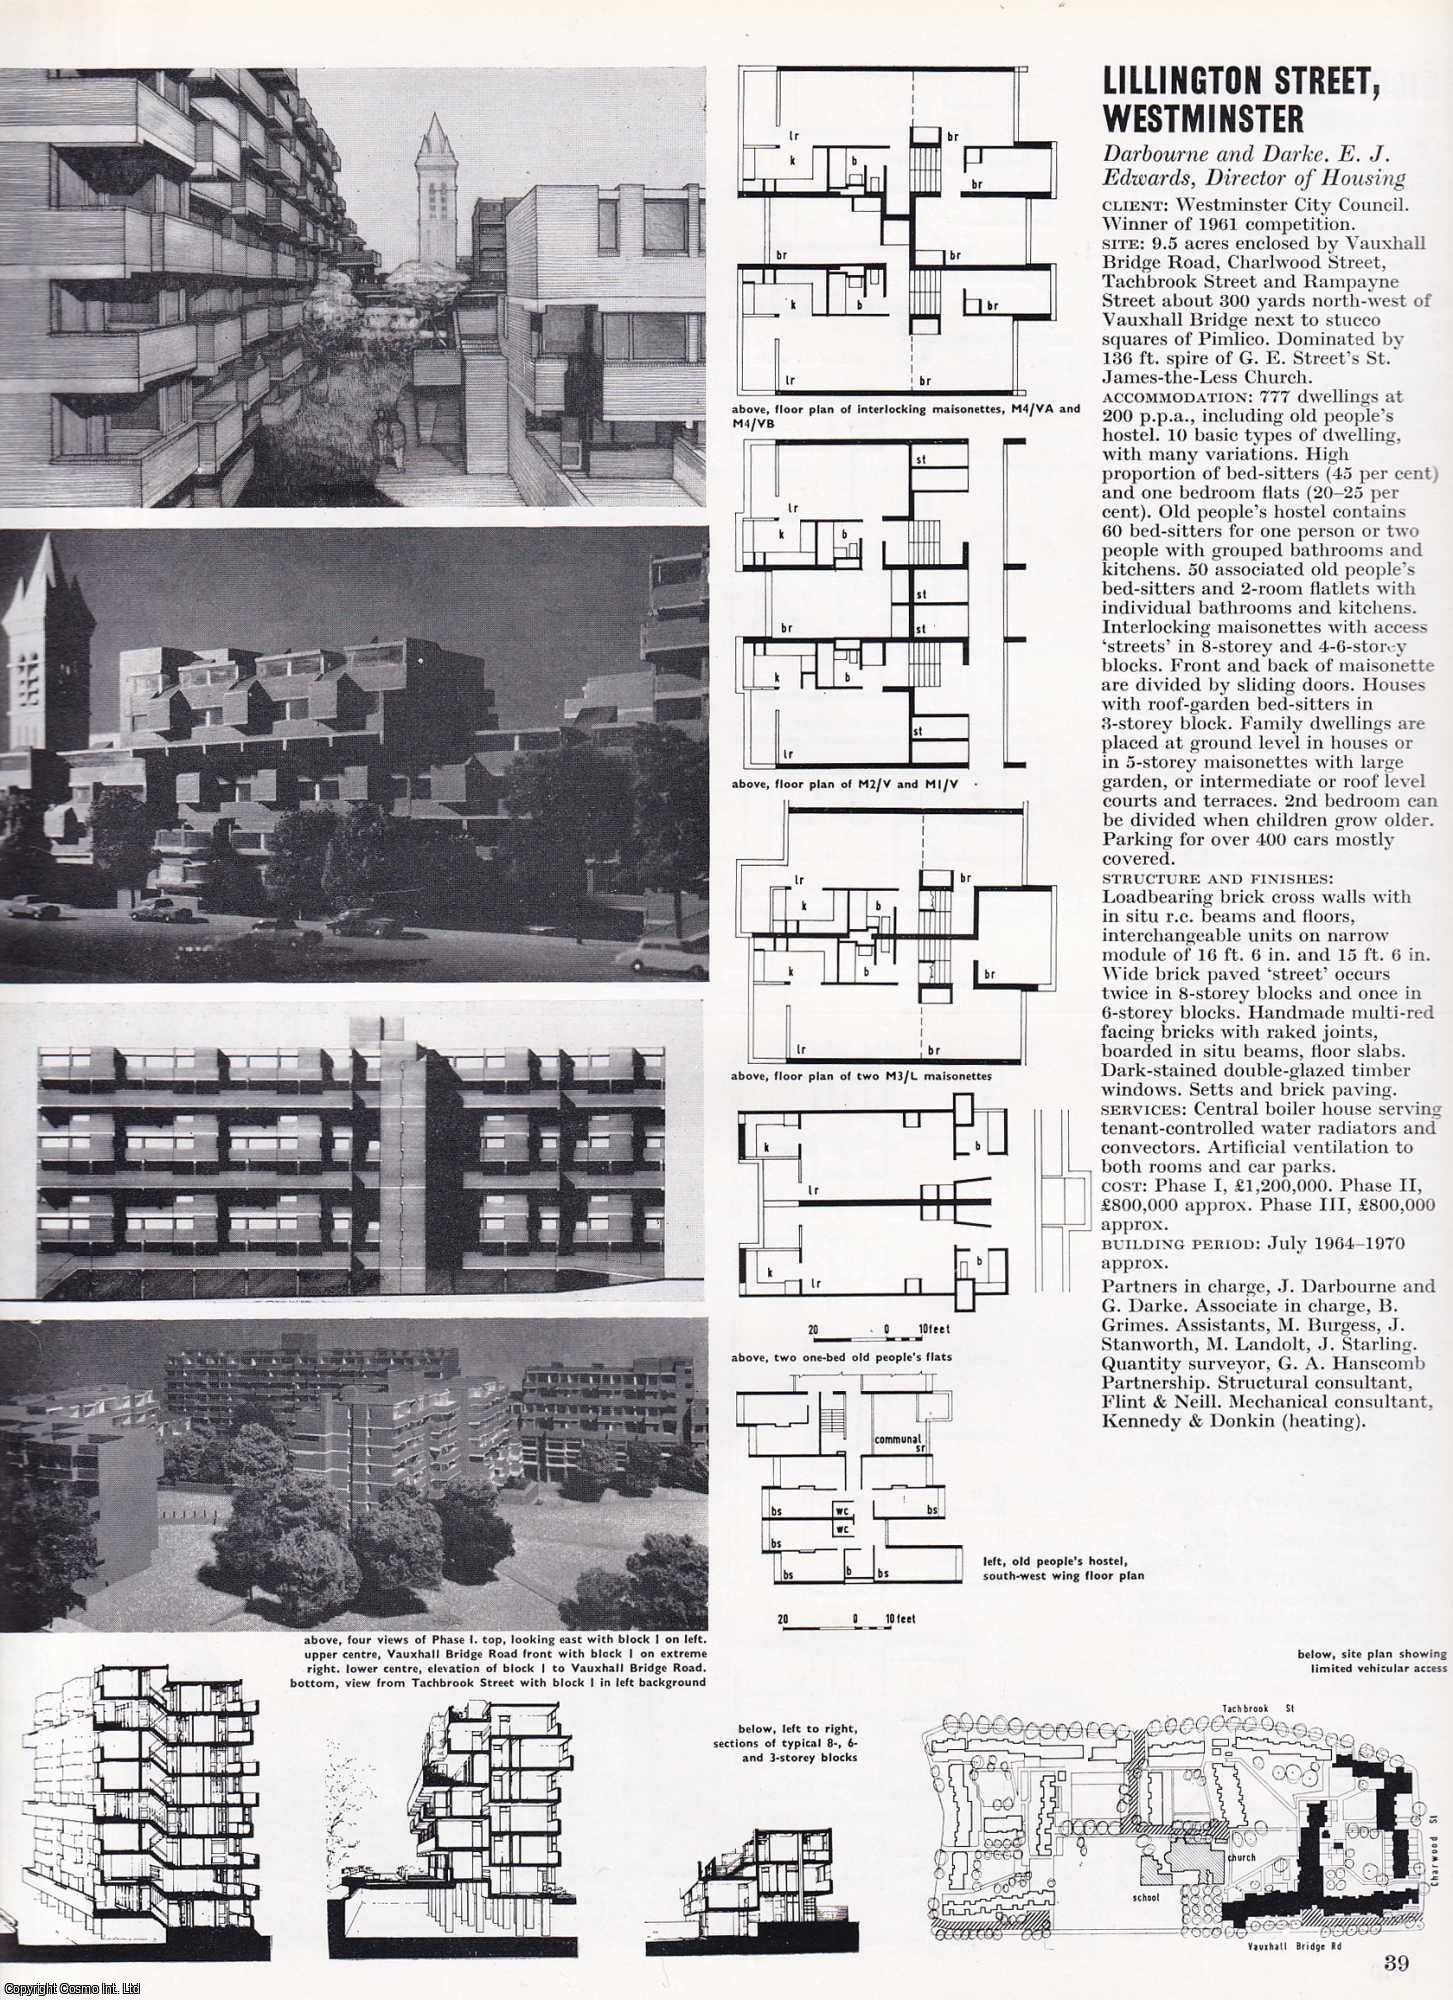 HOUSING - Housing, c. 1965. A collection of 33 buildings described and illustrated. This is an original article from The Architectural Review, 1965. See pictures for details of contents.